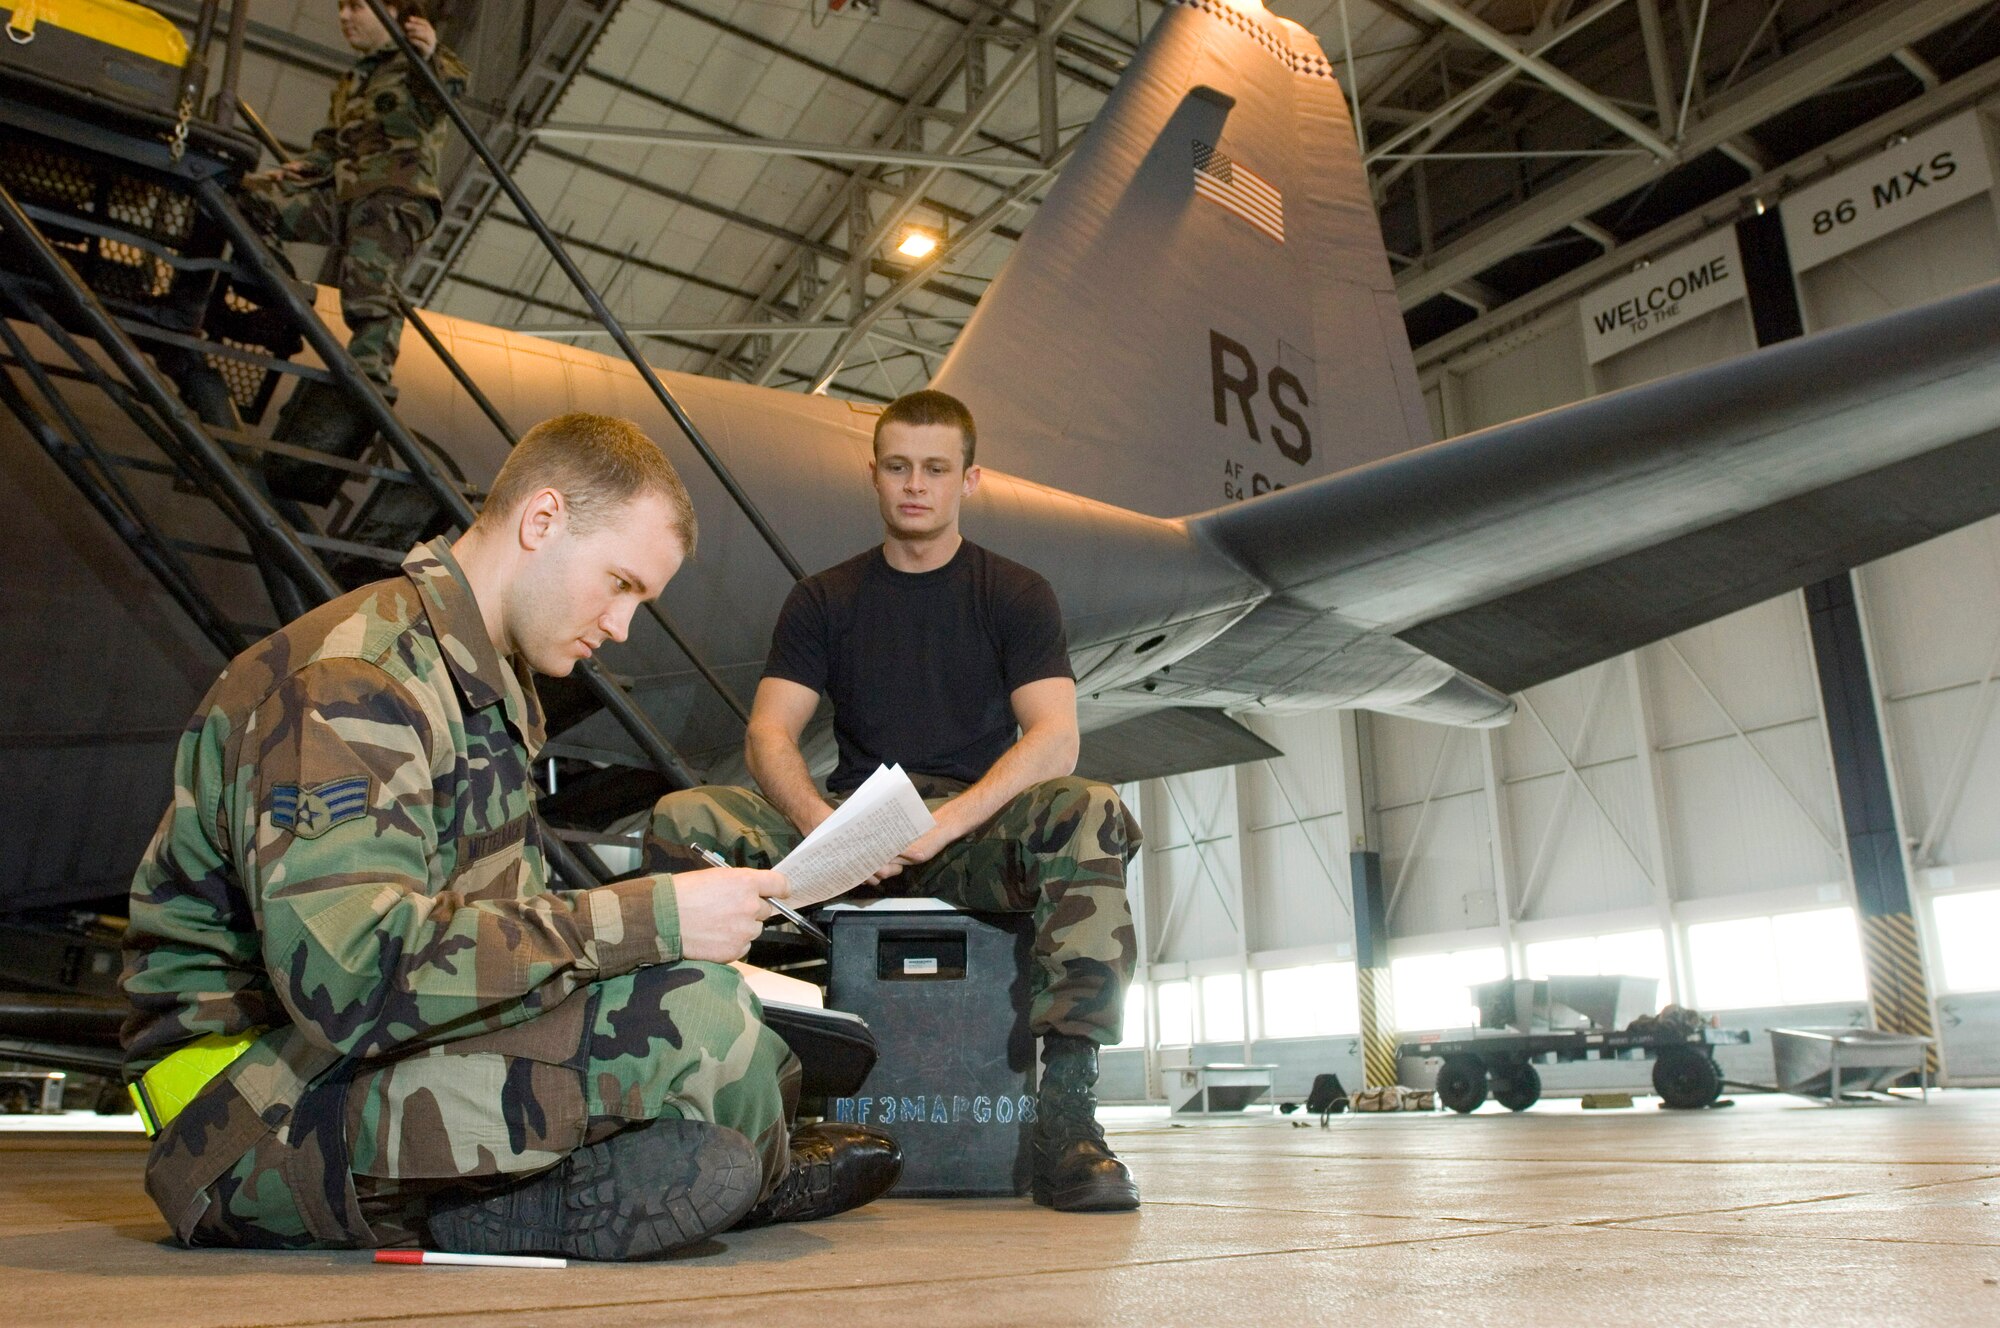 Senior Airman Nate Andrews waits as Senior Airman Brian Mittelbach reviews C-130 Hercules aircraft forms at Ramstein Air Base, Germany, on Monday, March 27, 2006. Airman Mittelbach, of Hamilton, Mass., and Airman Andrews, of Wilmington, N.C., are Hercules crew chiefs with the 86th Aircraft Maintenance Squadron. (U.S. Air Force photo/Master Sgt. John E. Lasky)